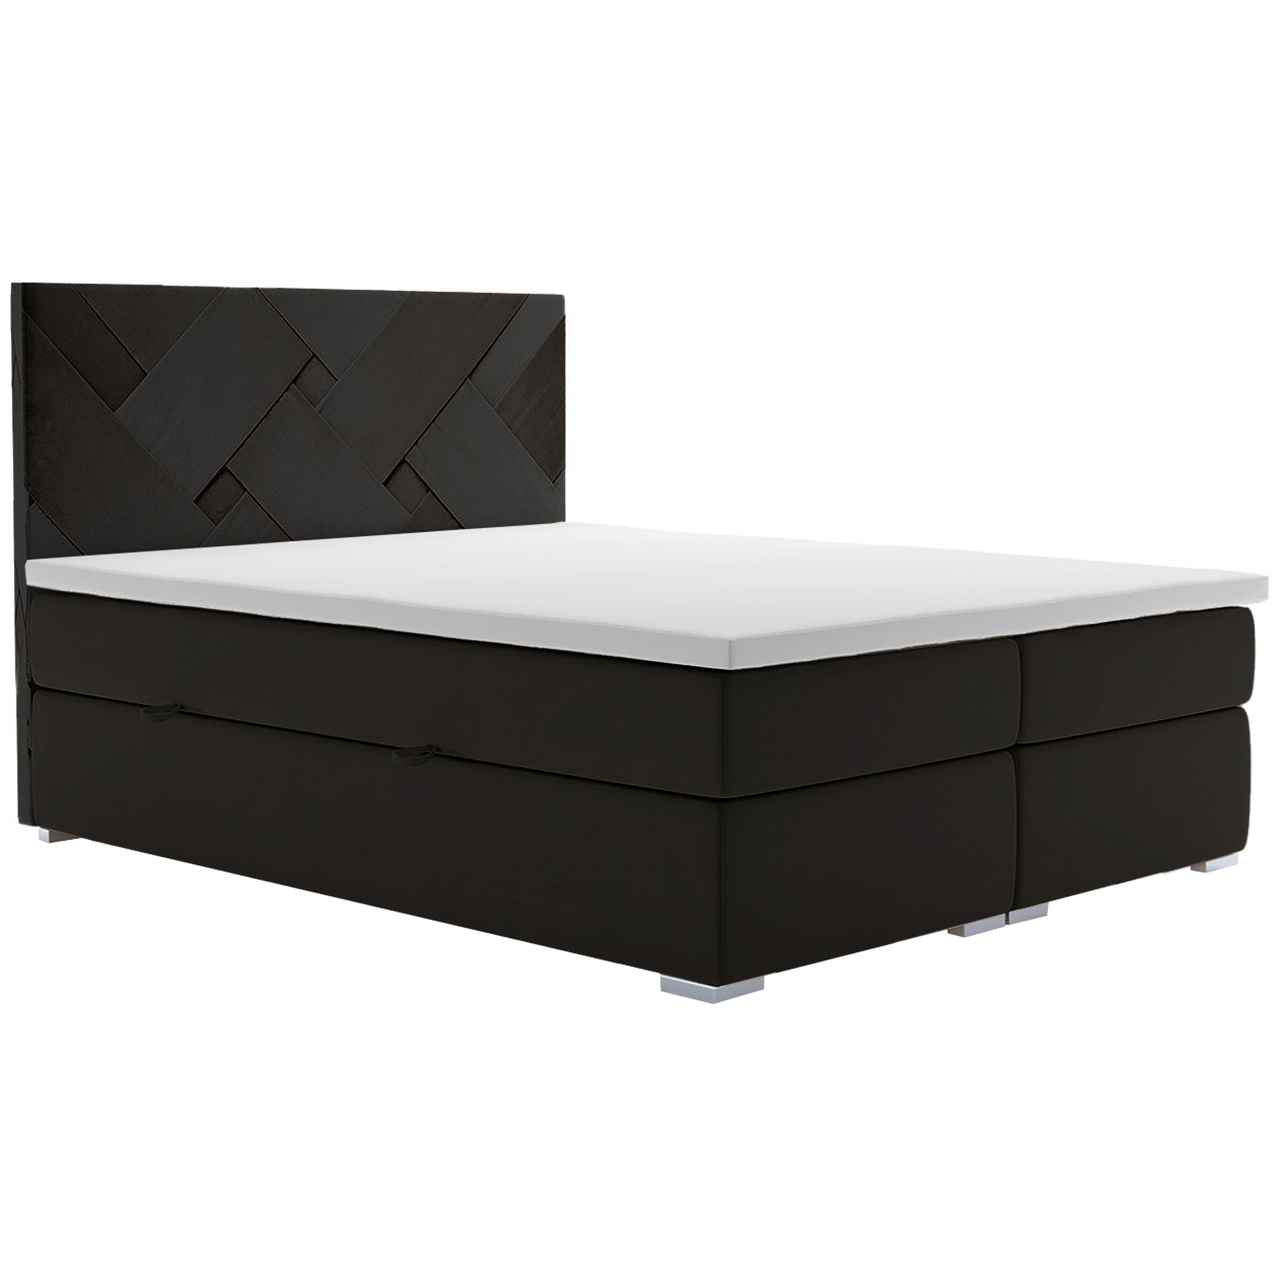 Upholstered bed BALIZO 140x200 riviera 100